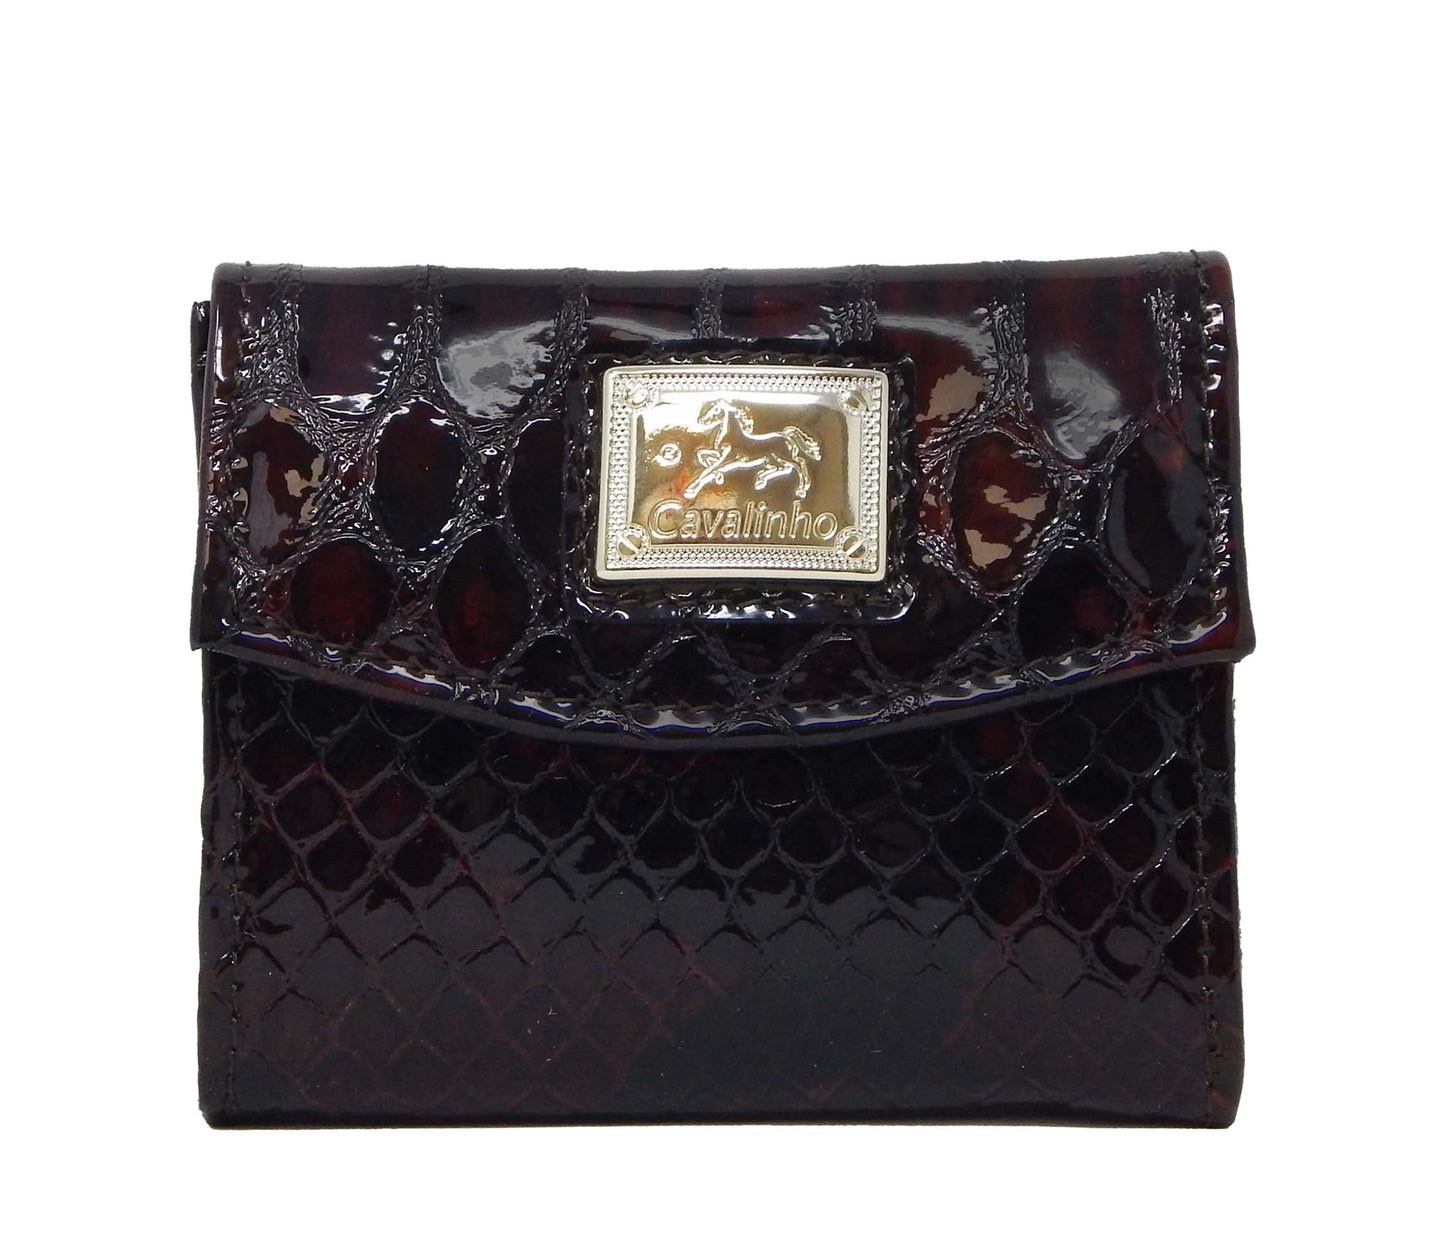 Cavalinho Gallop Mini Patent Leather Wallet - Brown - 28170530.02.99_1